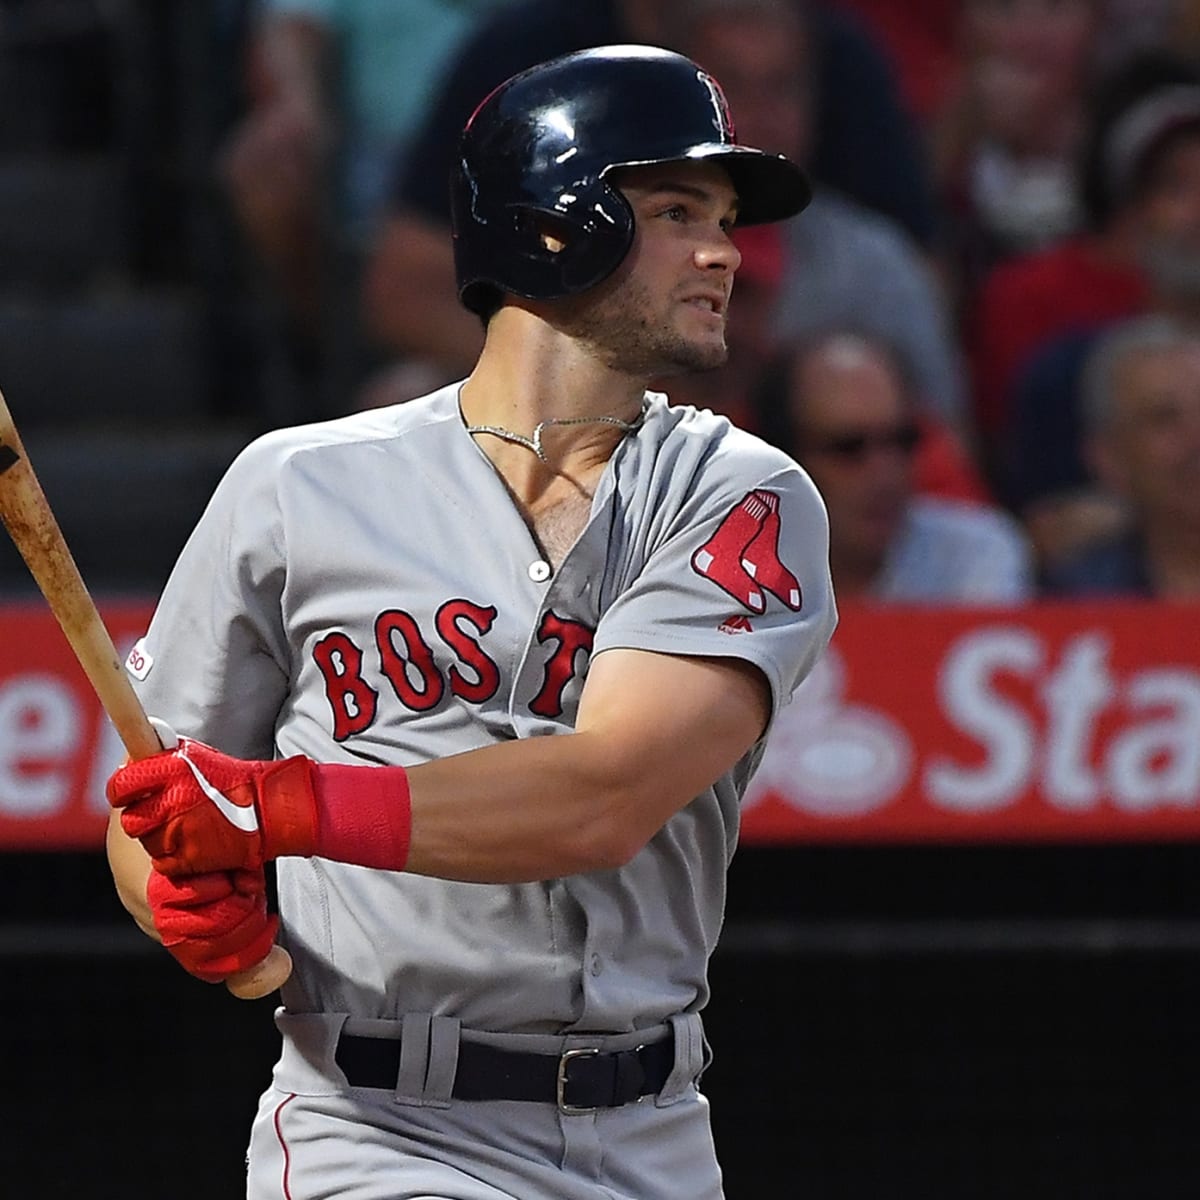 Benintendi signs with Red Sox